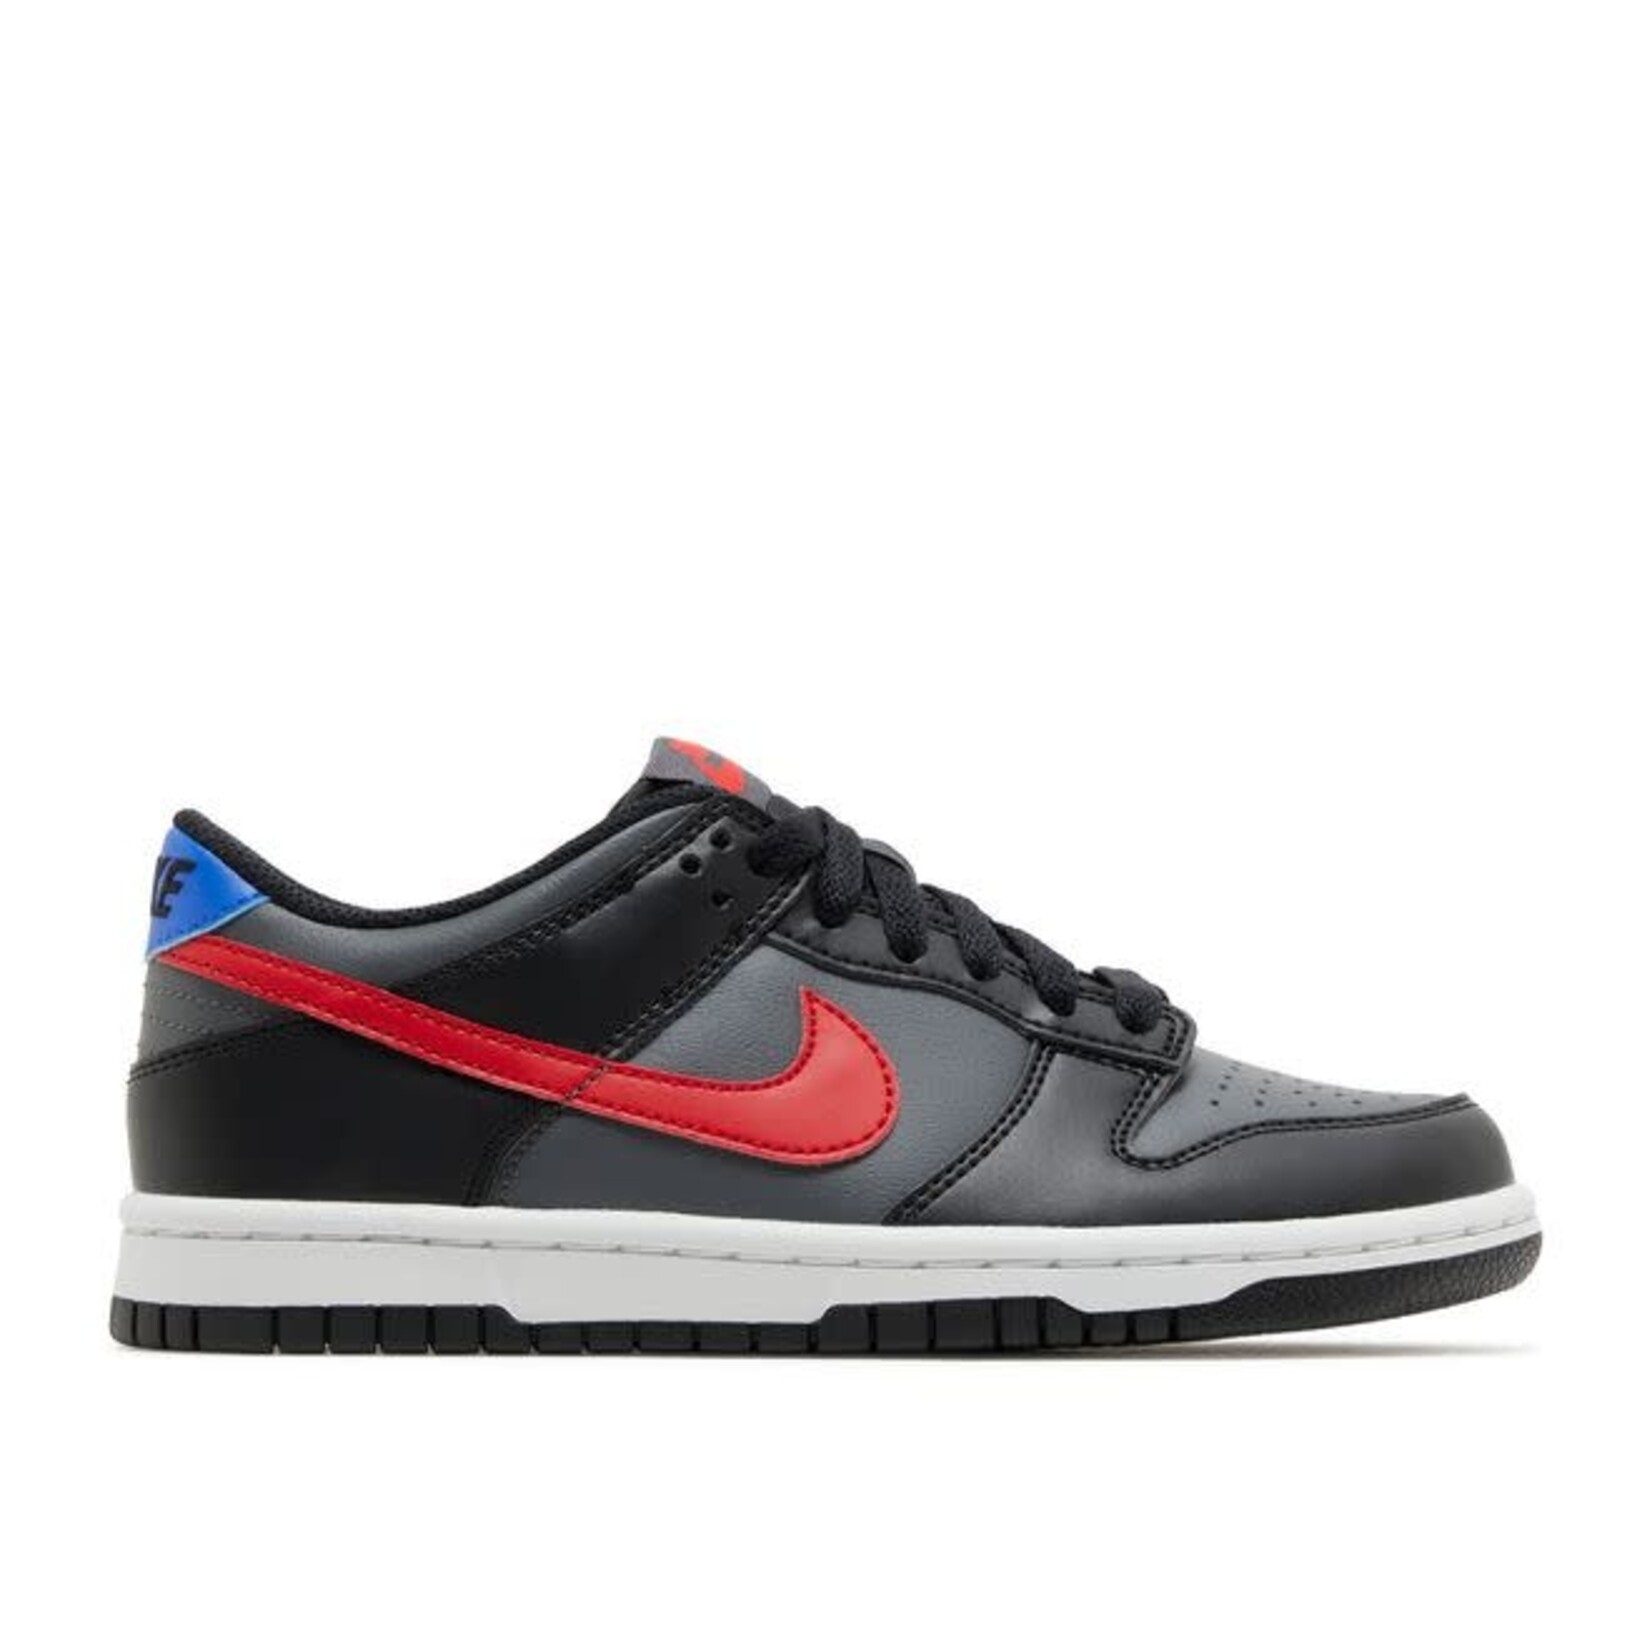 Nike Nike Dunk Low Black Racer Blue University Red (GS) Size 6.5, DS BRAND NEW